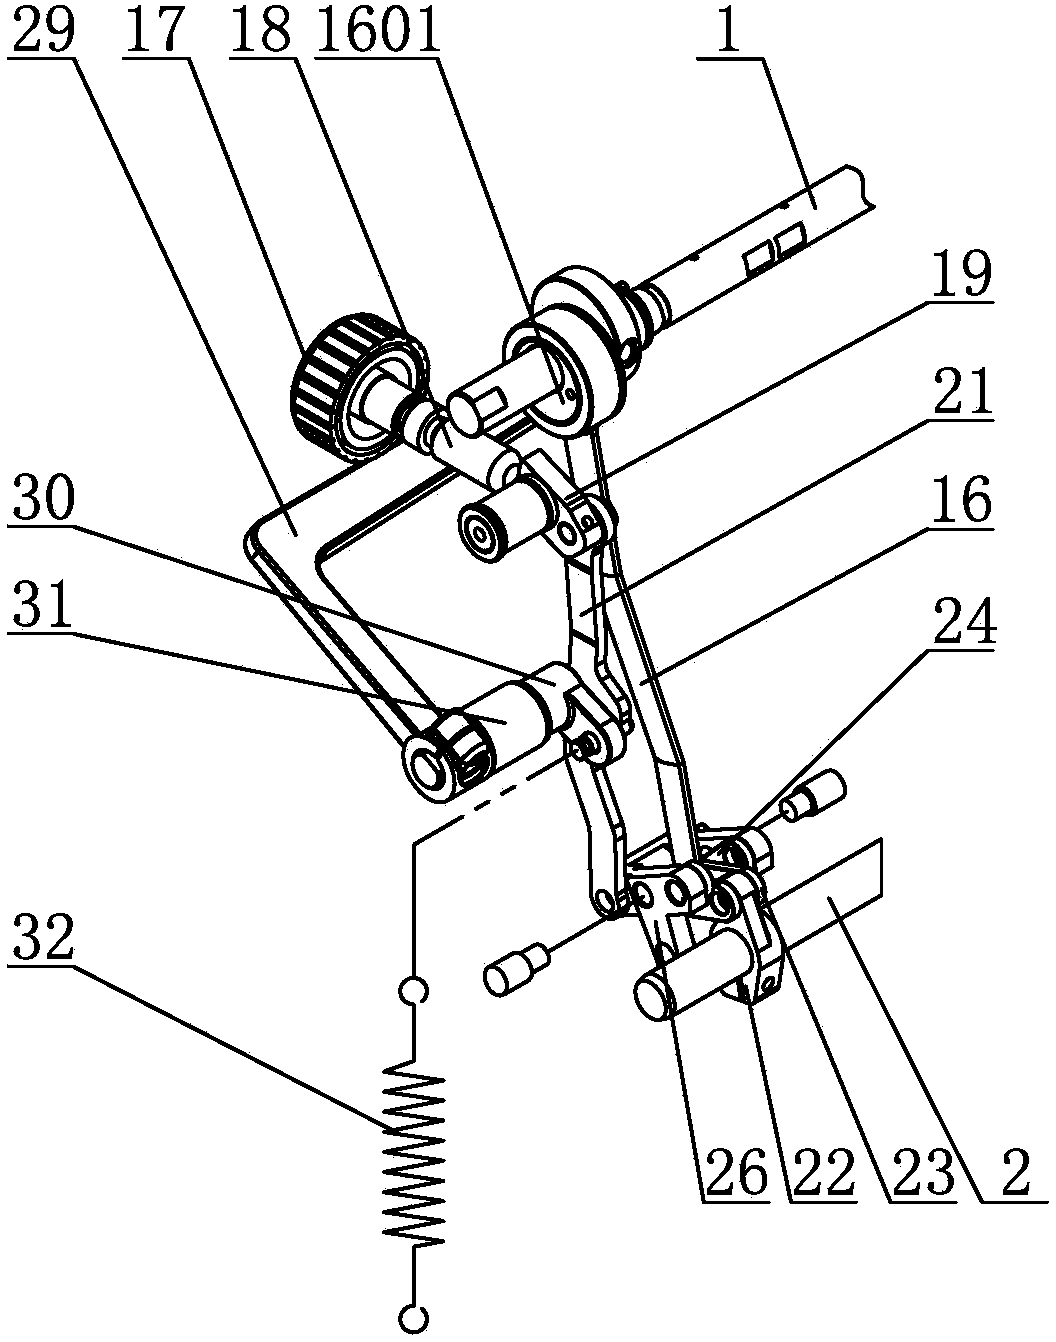 Sewing machine for up-down differential feeding